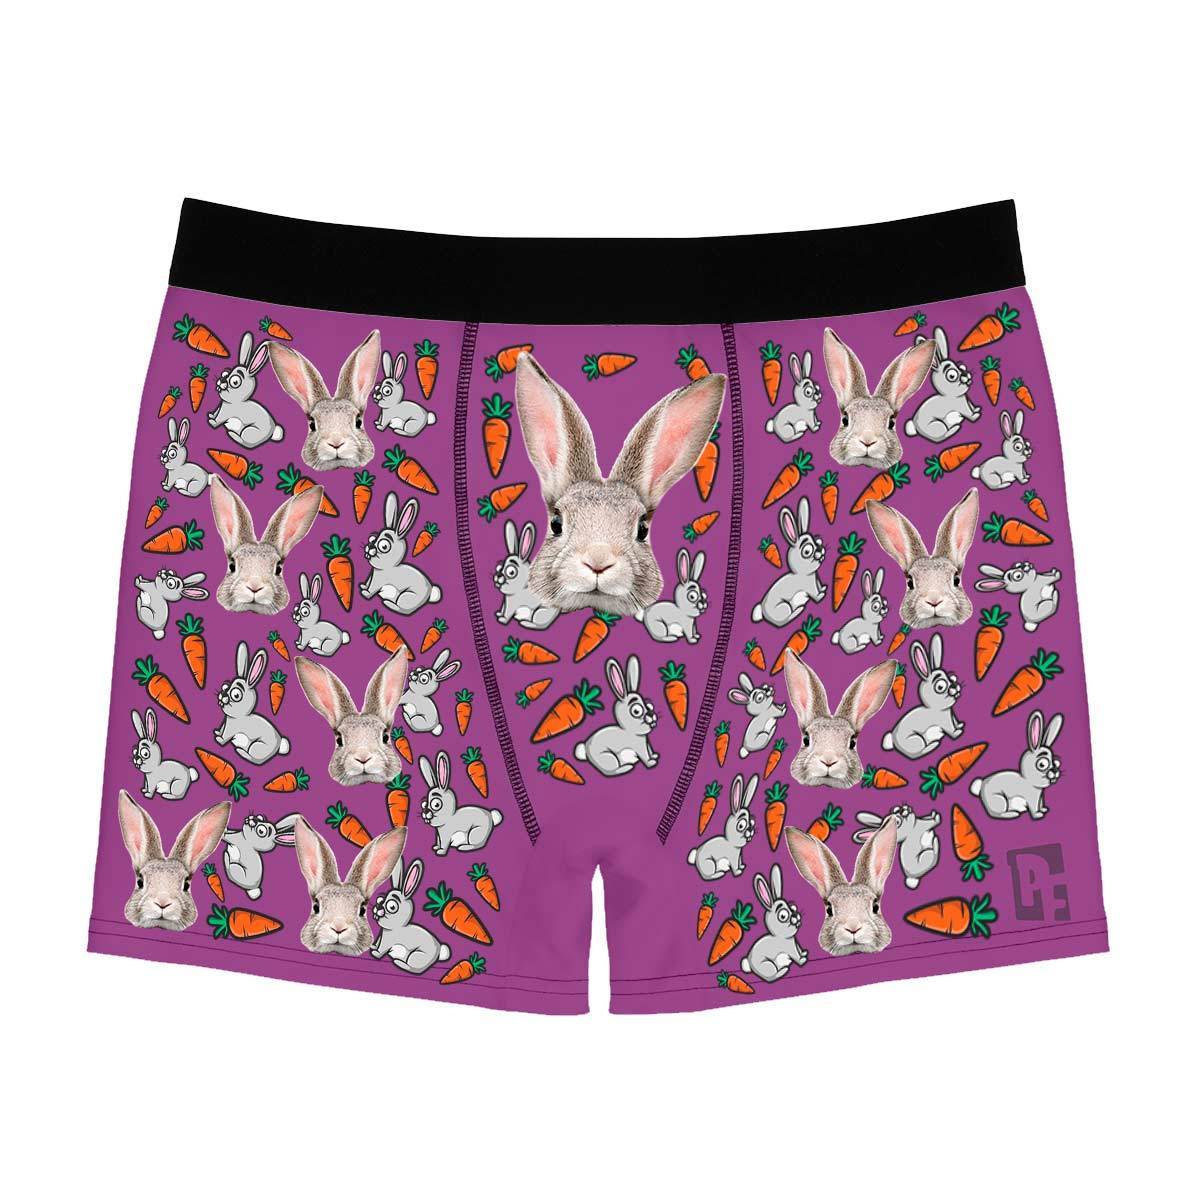 Purple Bunny men's boxer briefs personalized with photo printed on them